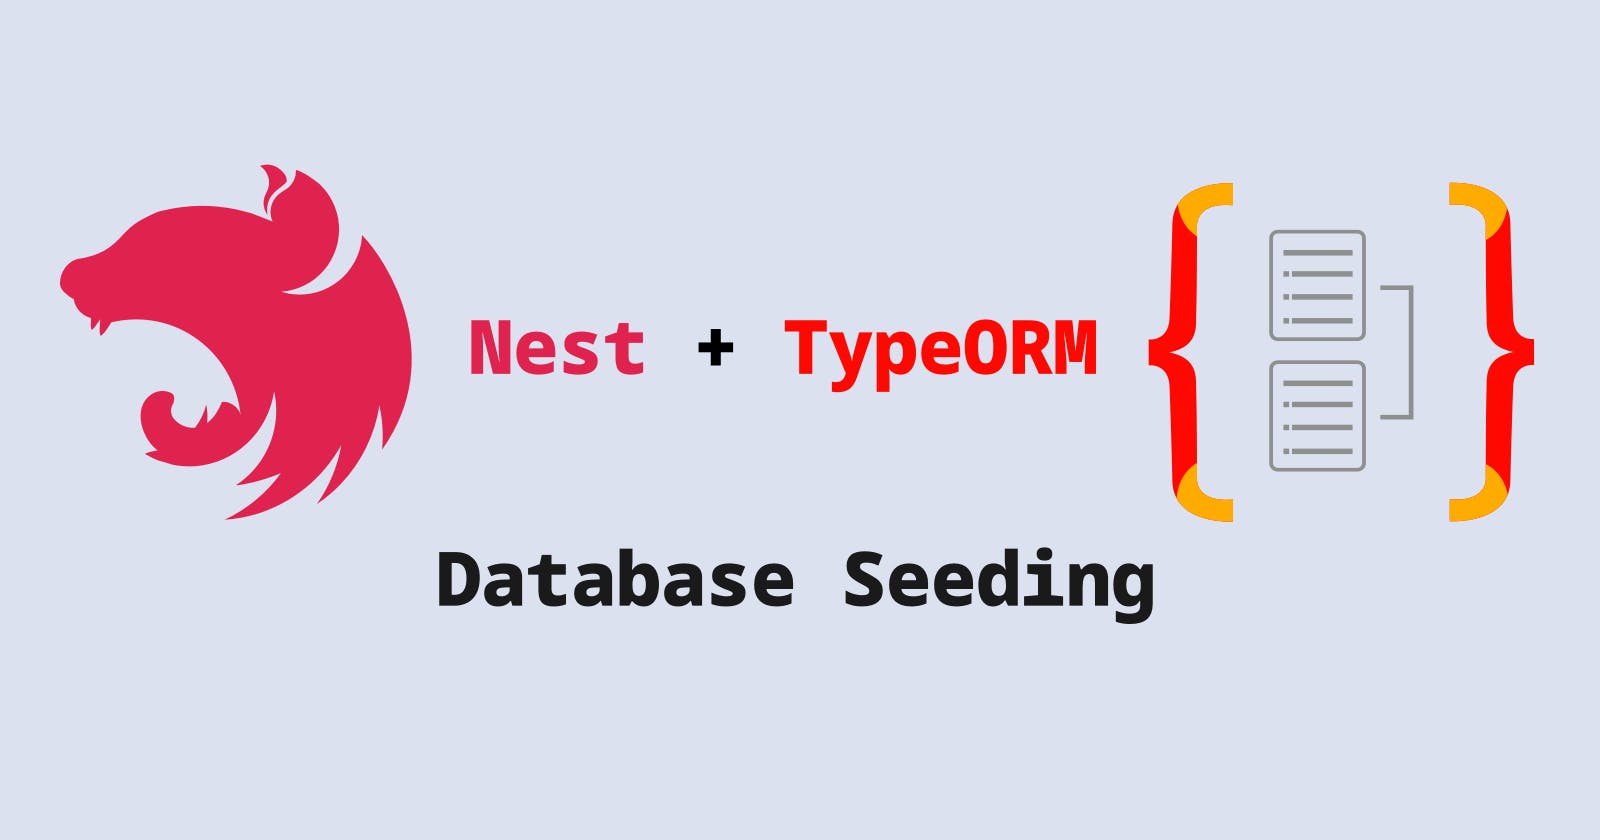 How to seed database using TypeORM in a NestJS project